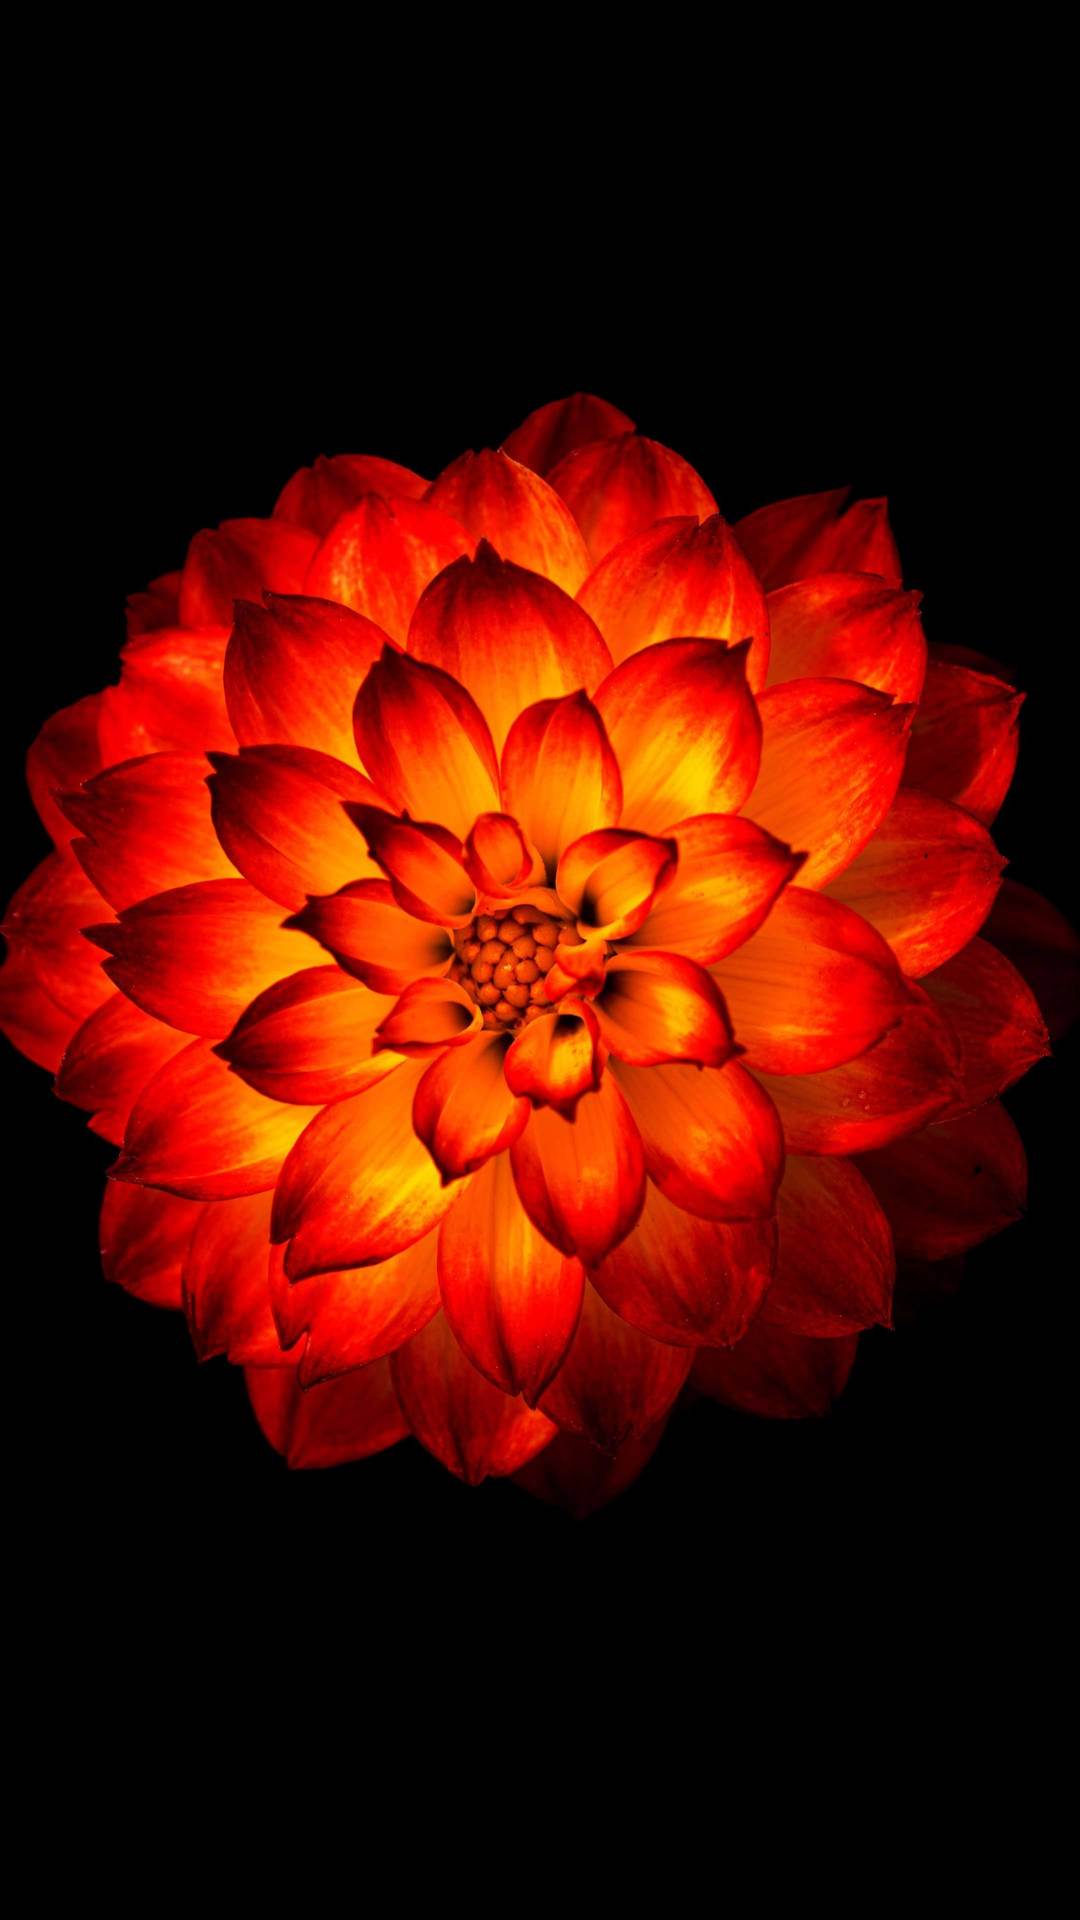 Ethereal Glow Of A Dahlia - Flower Phone Wallpaper